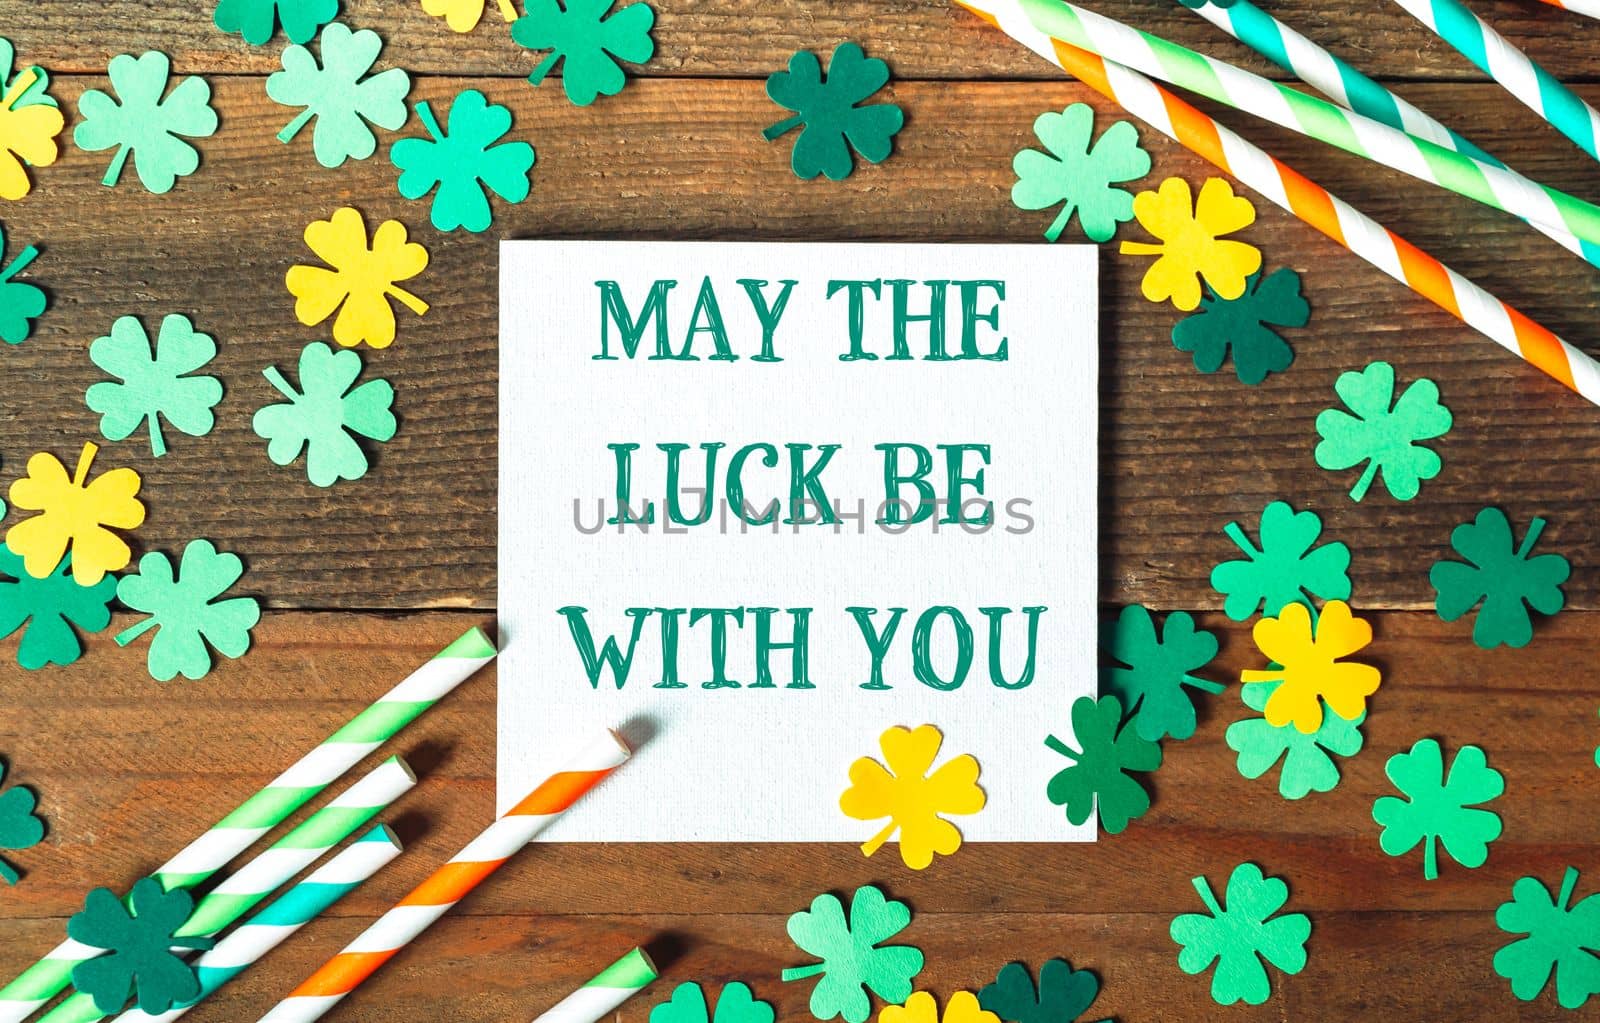 st. patrick's day greeting card on wooden background with clover